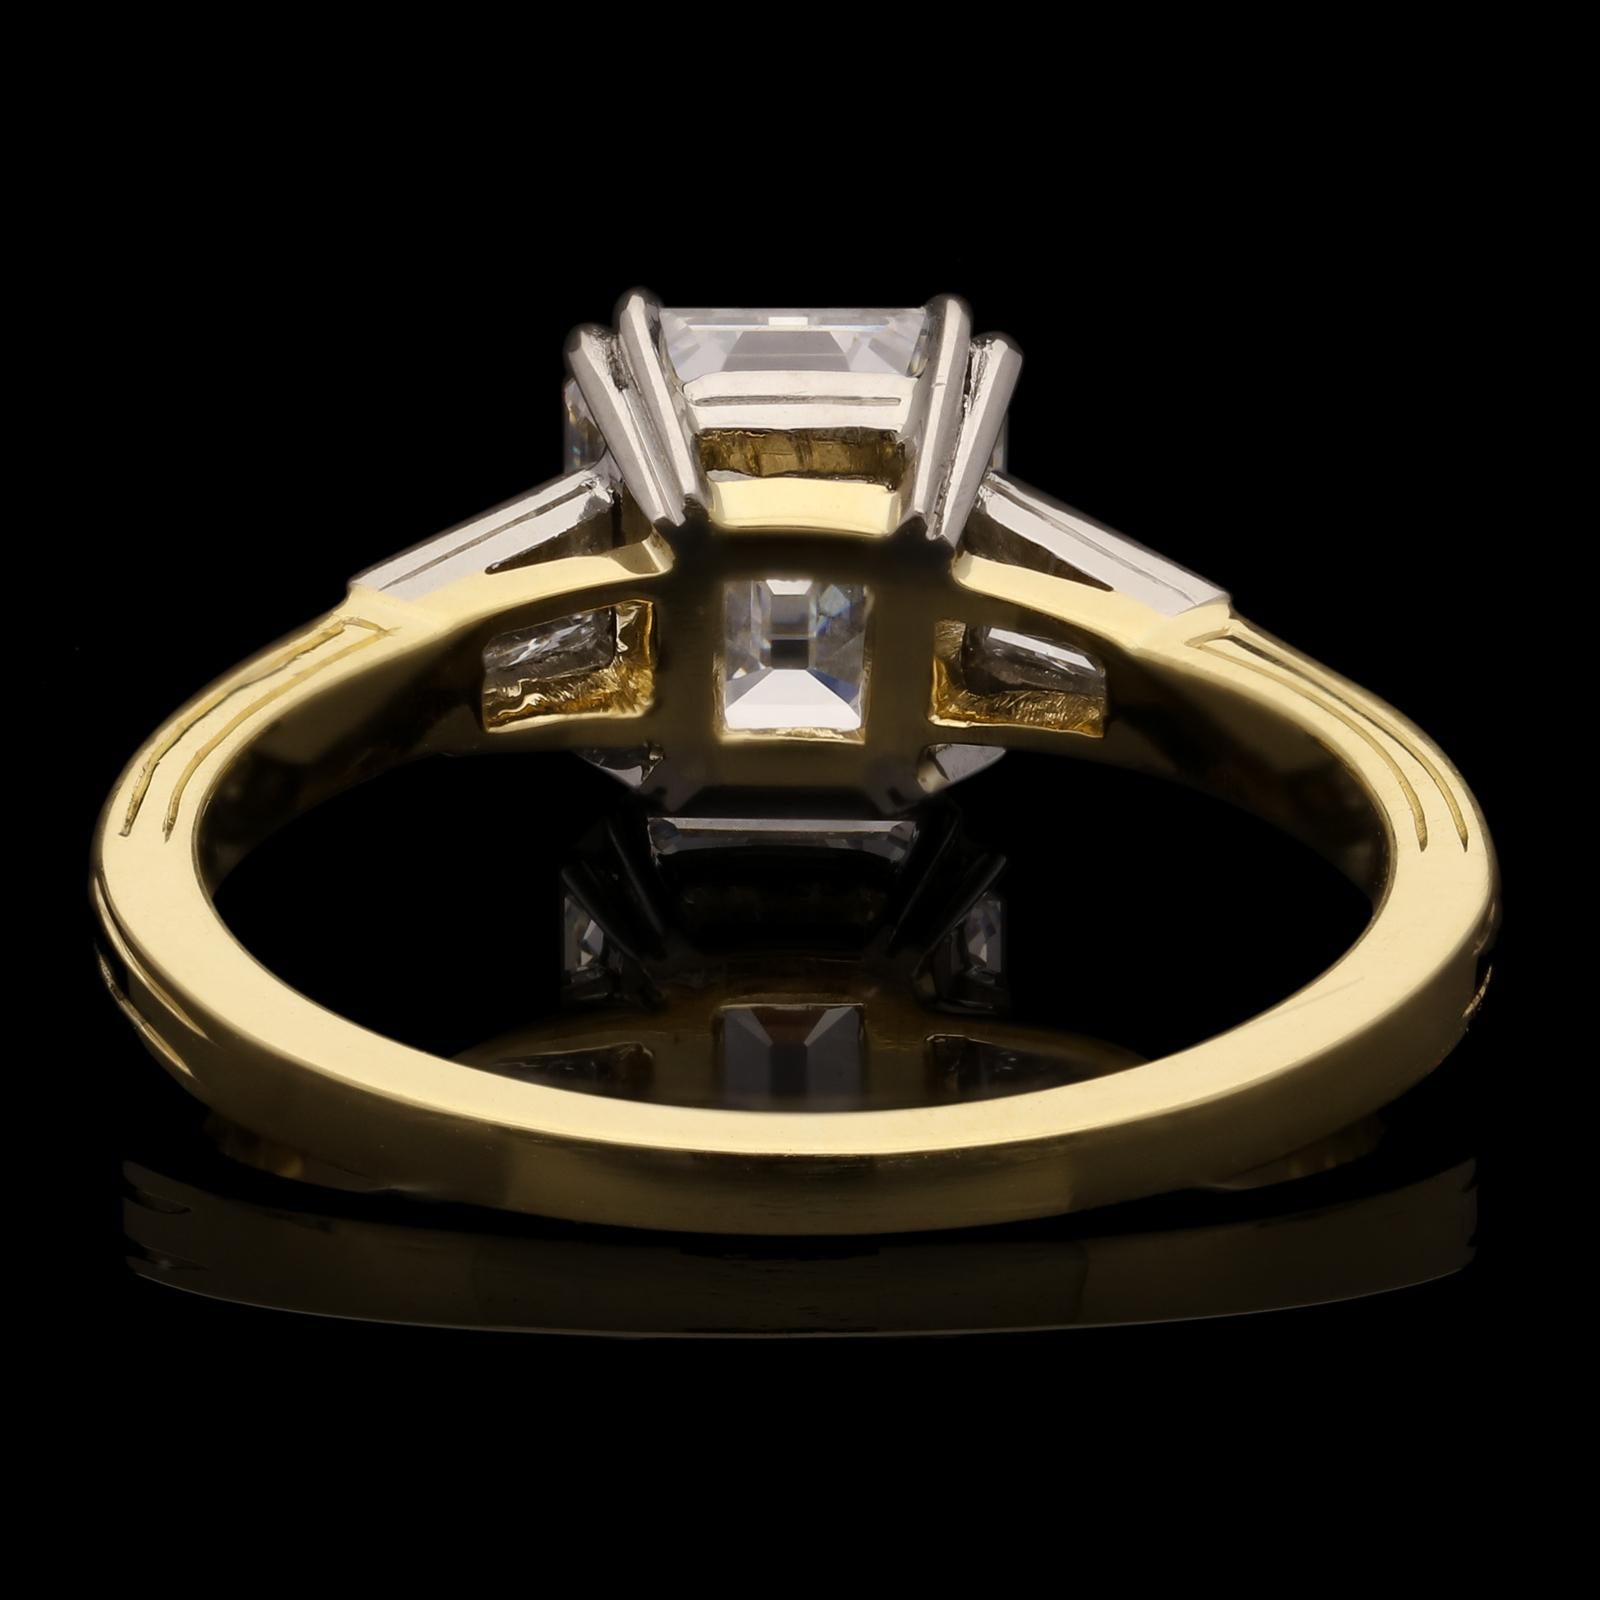 A beautiful vintage emerald-cut diamond ring by Hancocks set with a finest quality vintage emerald-cut diamond weighing 1.66ct and of D colour and Internally Flawless clarity, corner claw set between tapered baguette diamond-set shoulders all in